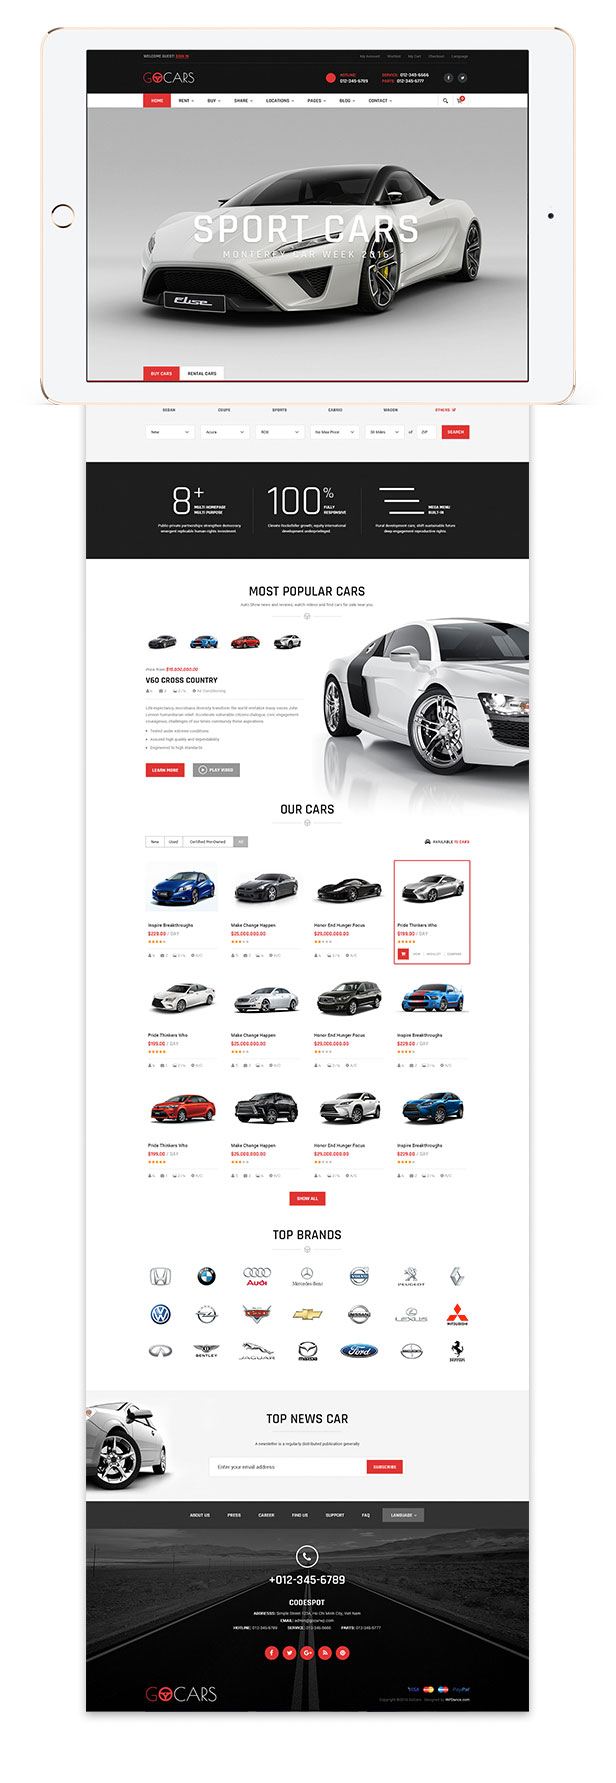 Homepage Design template - Go Cars